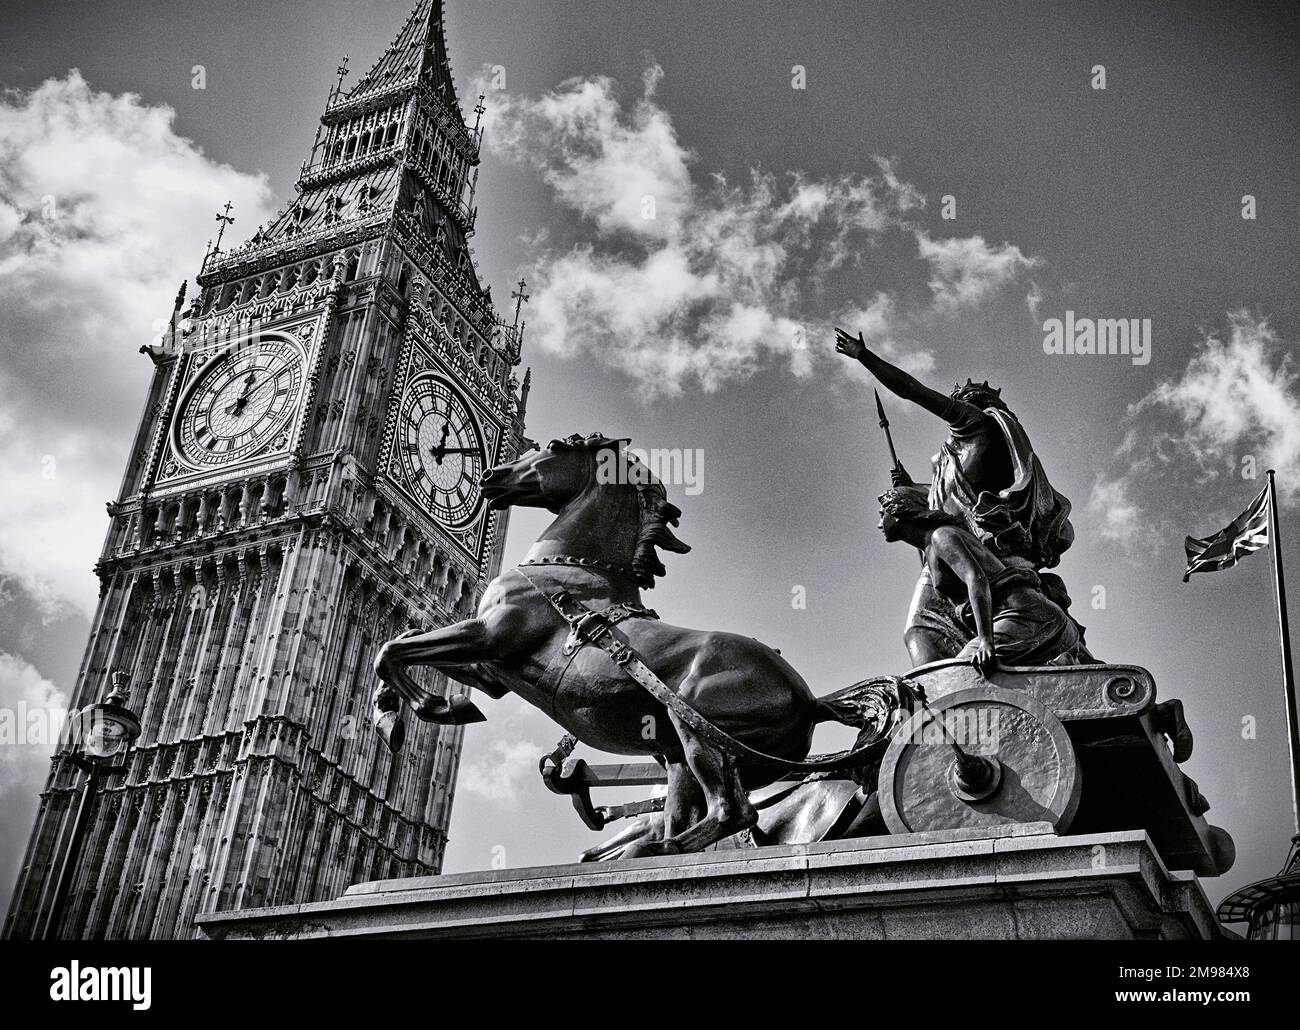 Queen of the Iceni - This bronze statue of Boadicea (Boudicca), at the foot of Westminster Bridge, London, was sculpted in 1850 by Thomas Thornycroft. The iconic shape of Big Ben looms behind. Stock Photo